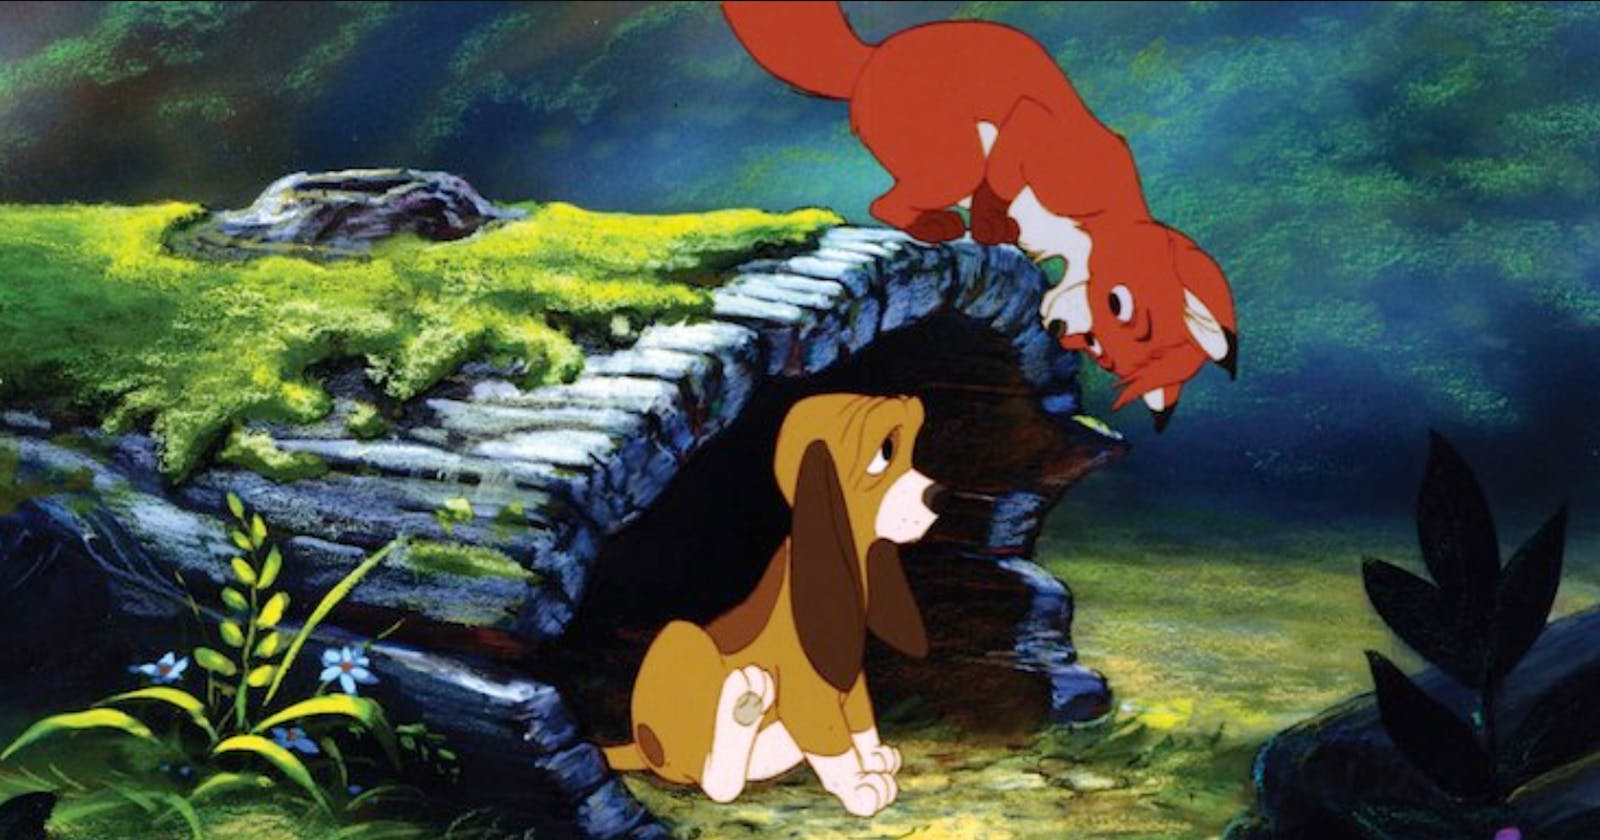 Race & Responsibility: The Fox & The Hound